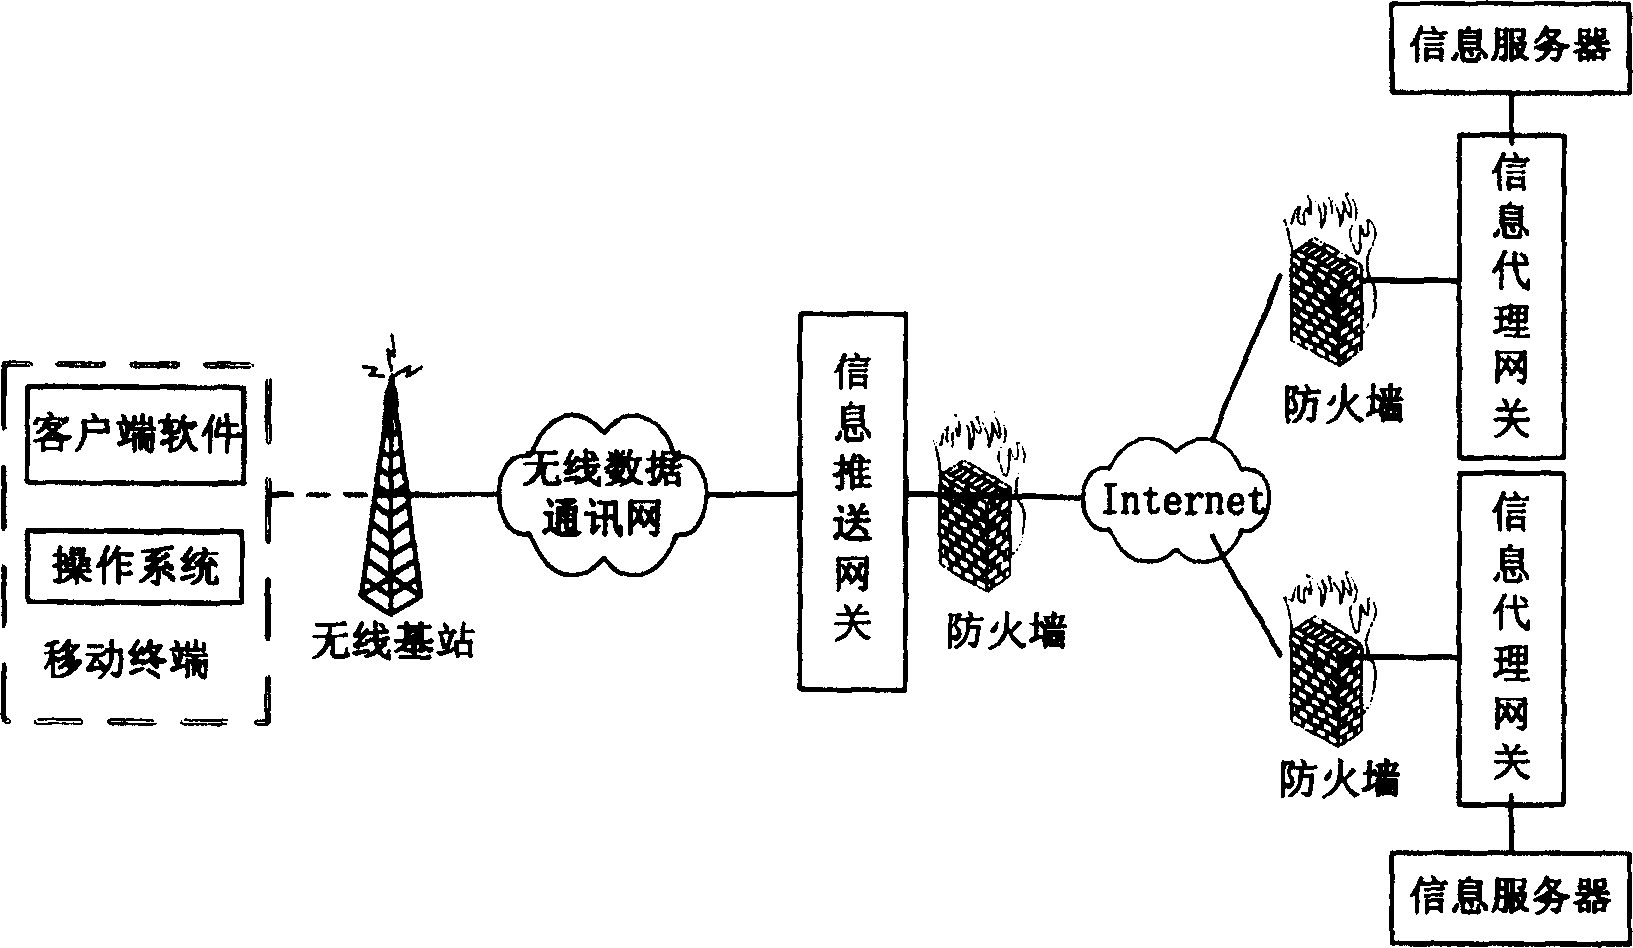 System and method for transmitting information from information server to mobile terminal